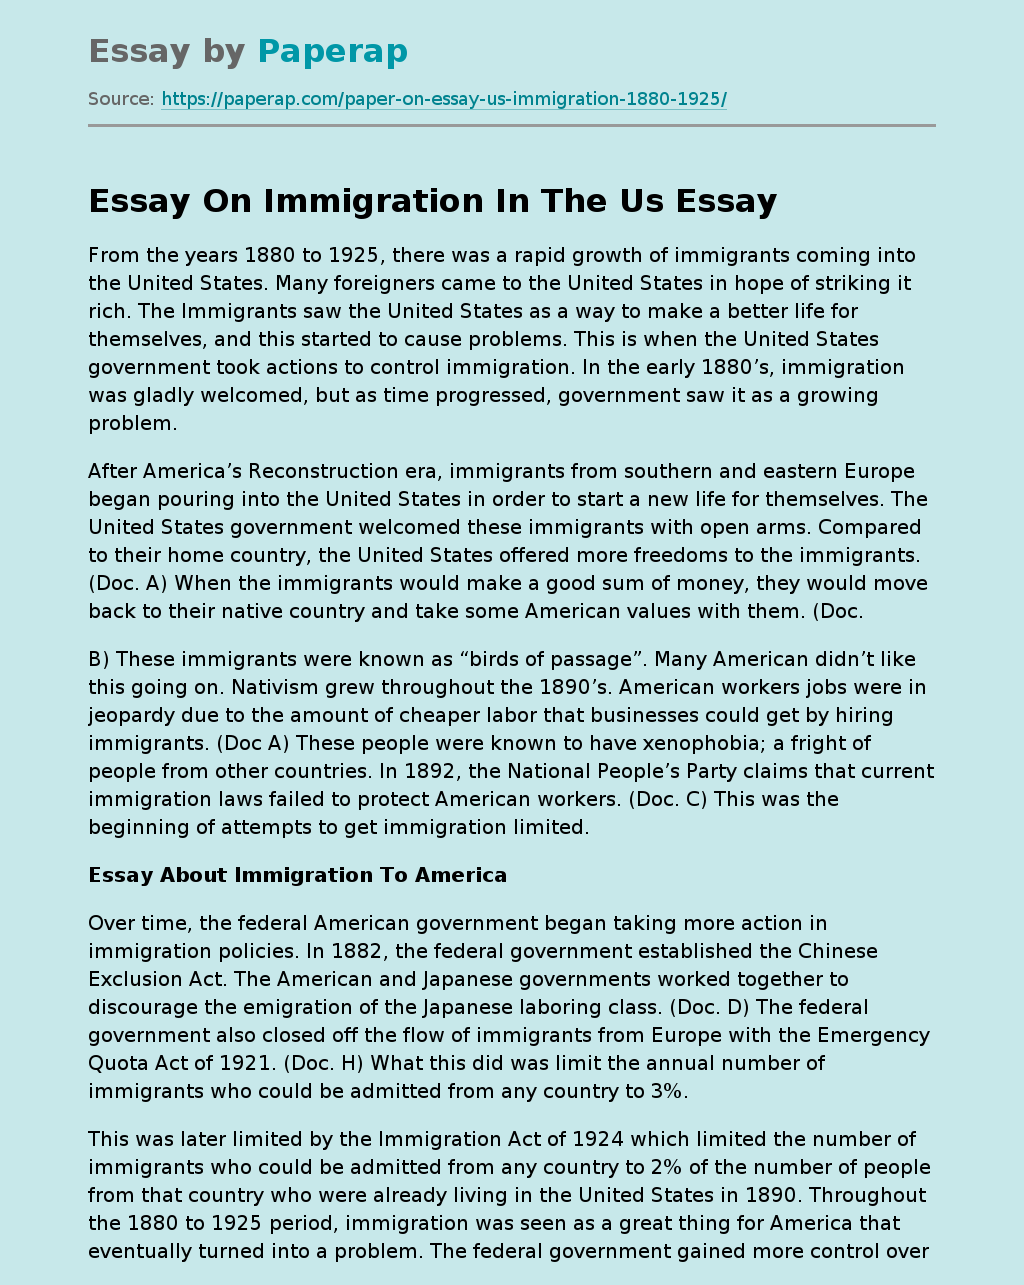 Essay On Immigration In The Us